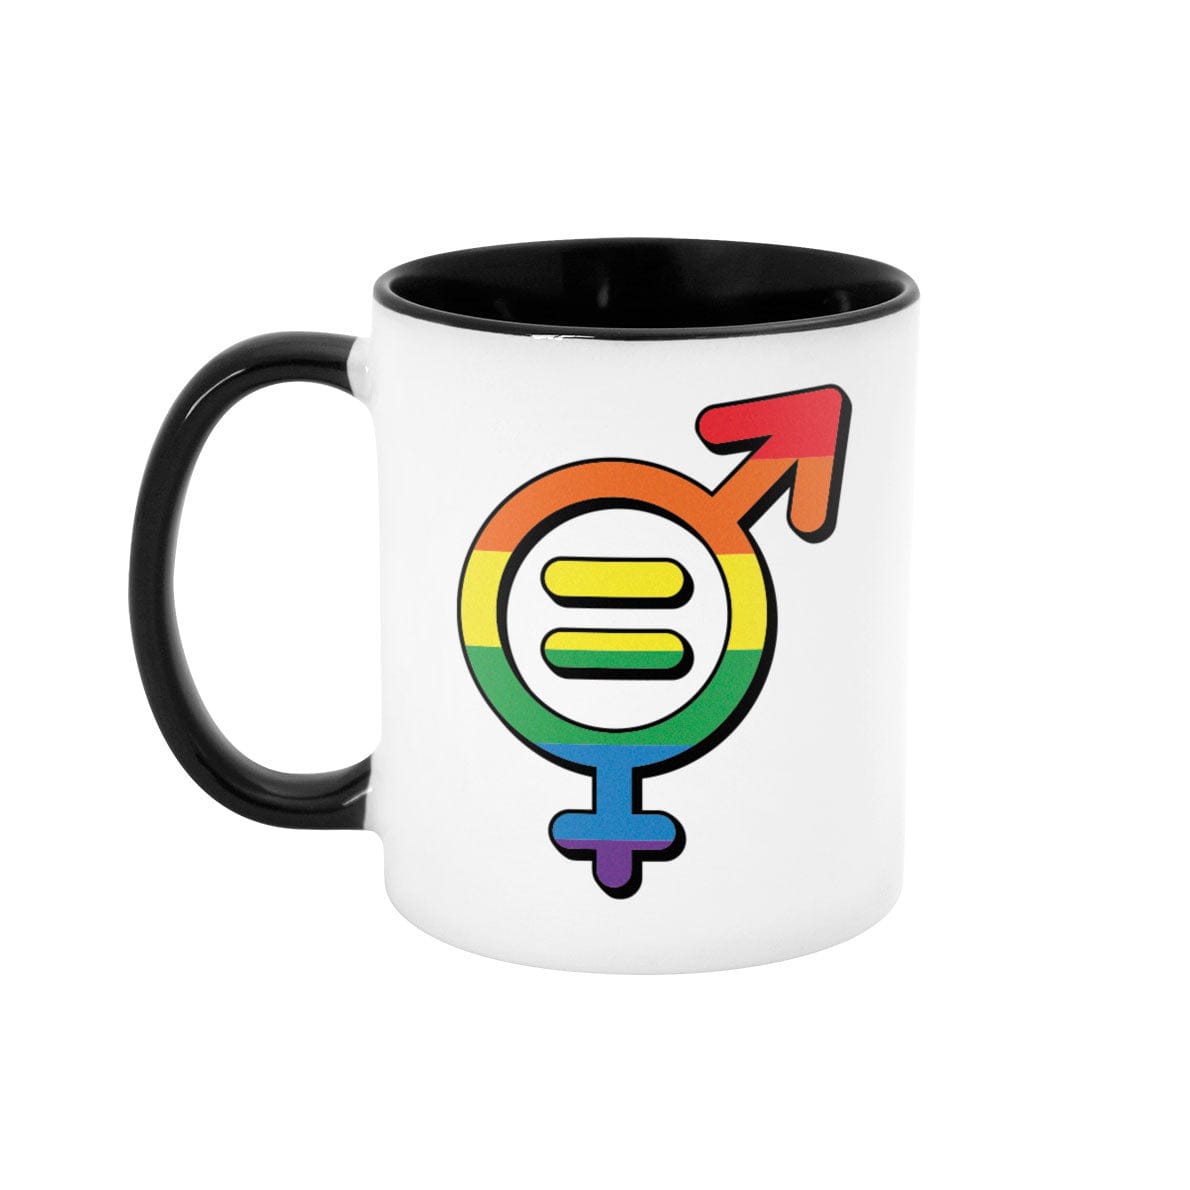 Pride Gender Equality Icon White with Black Accents 11 oz Mug